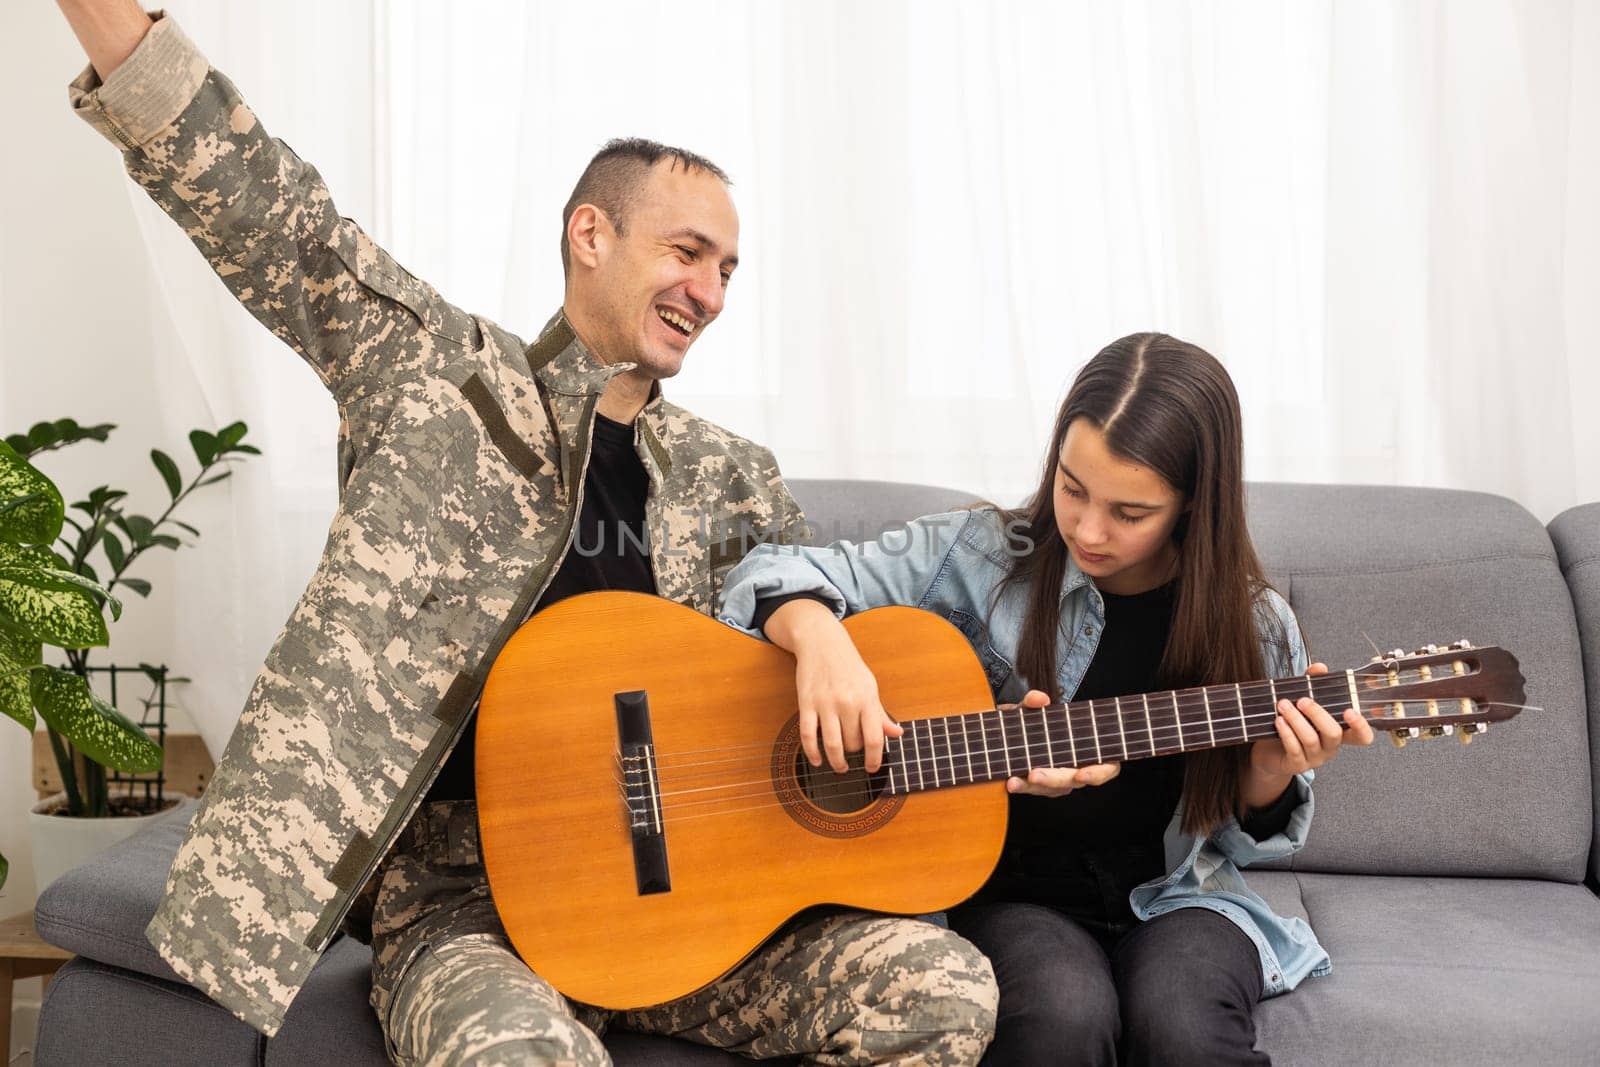 a veteran and his daughter play the guitar. High quality photo